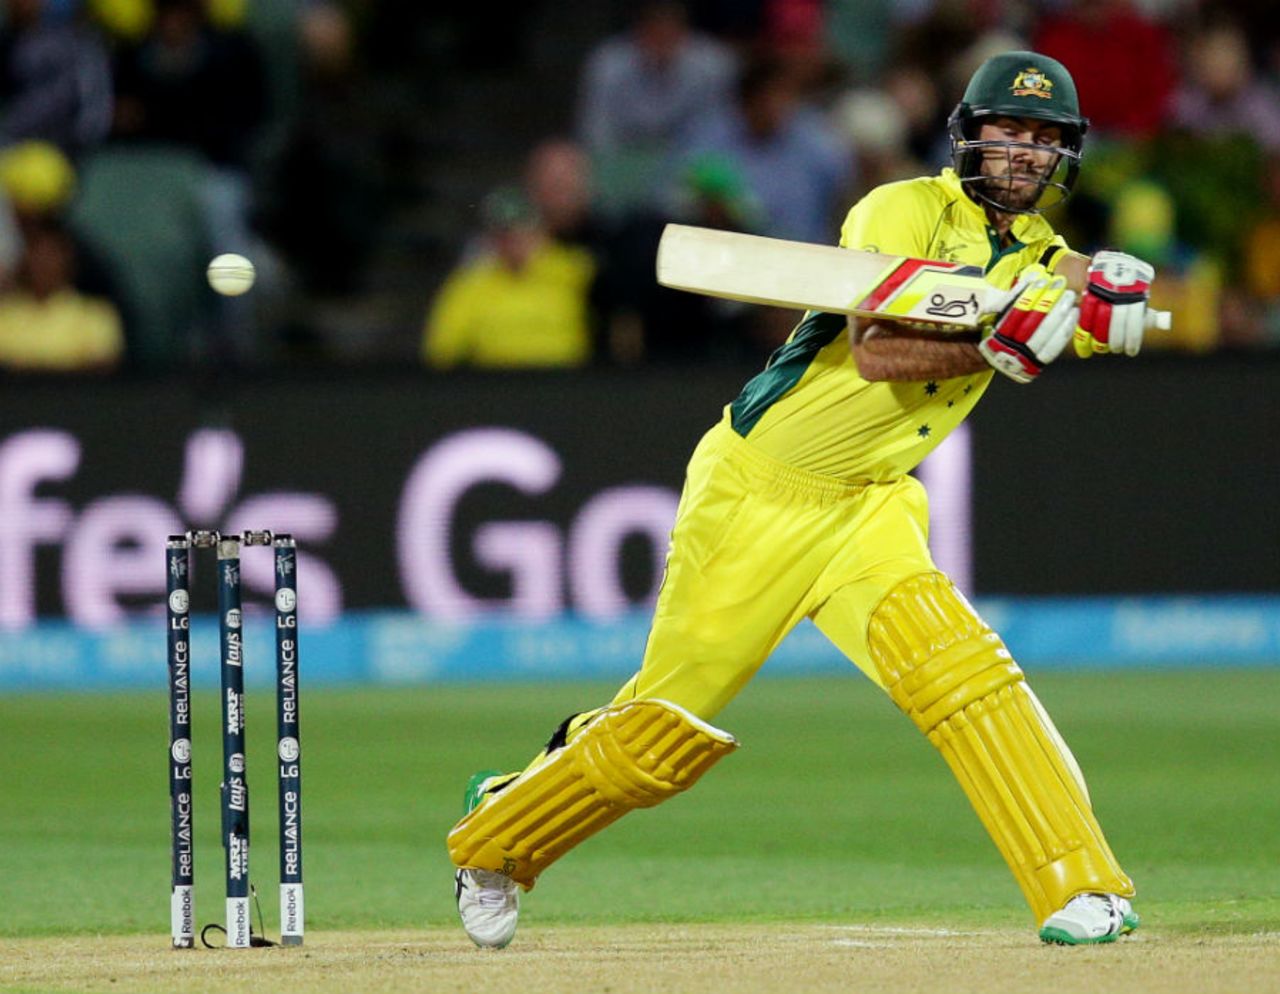 He can hit them even in his sleep: Glenn Maxwell executing an outrageous shot, Australia v Pakistan, World Cup 2015, 3rd quarter-final, Adelaide, March 20, 2015